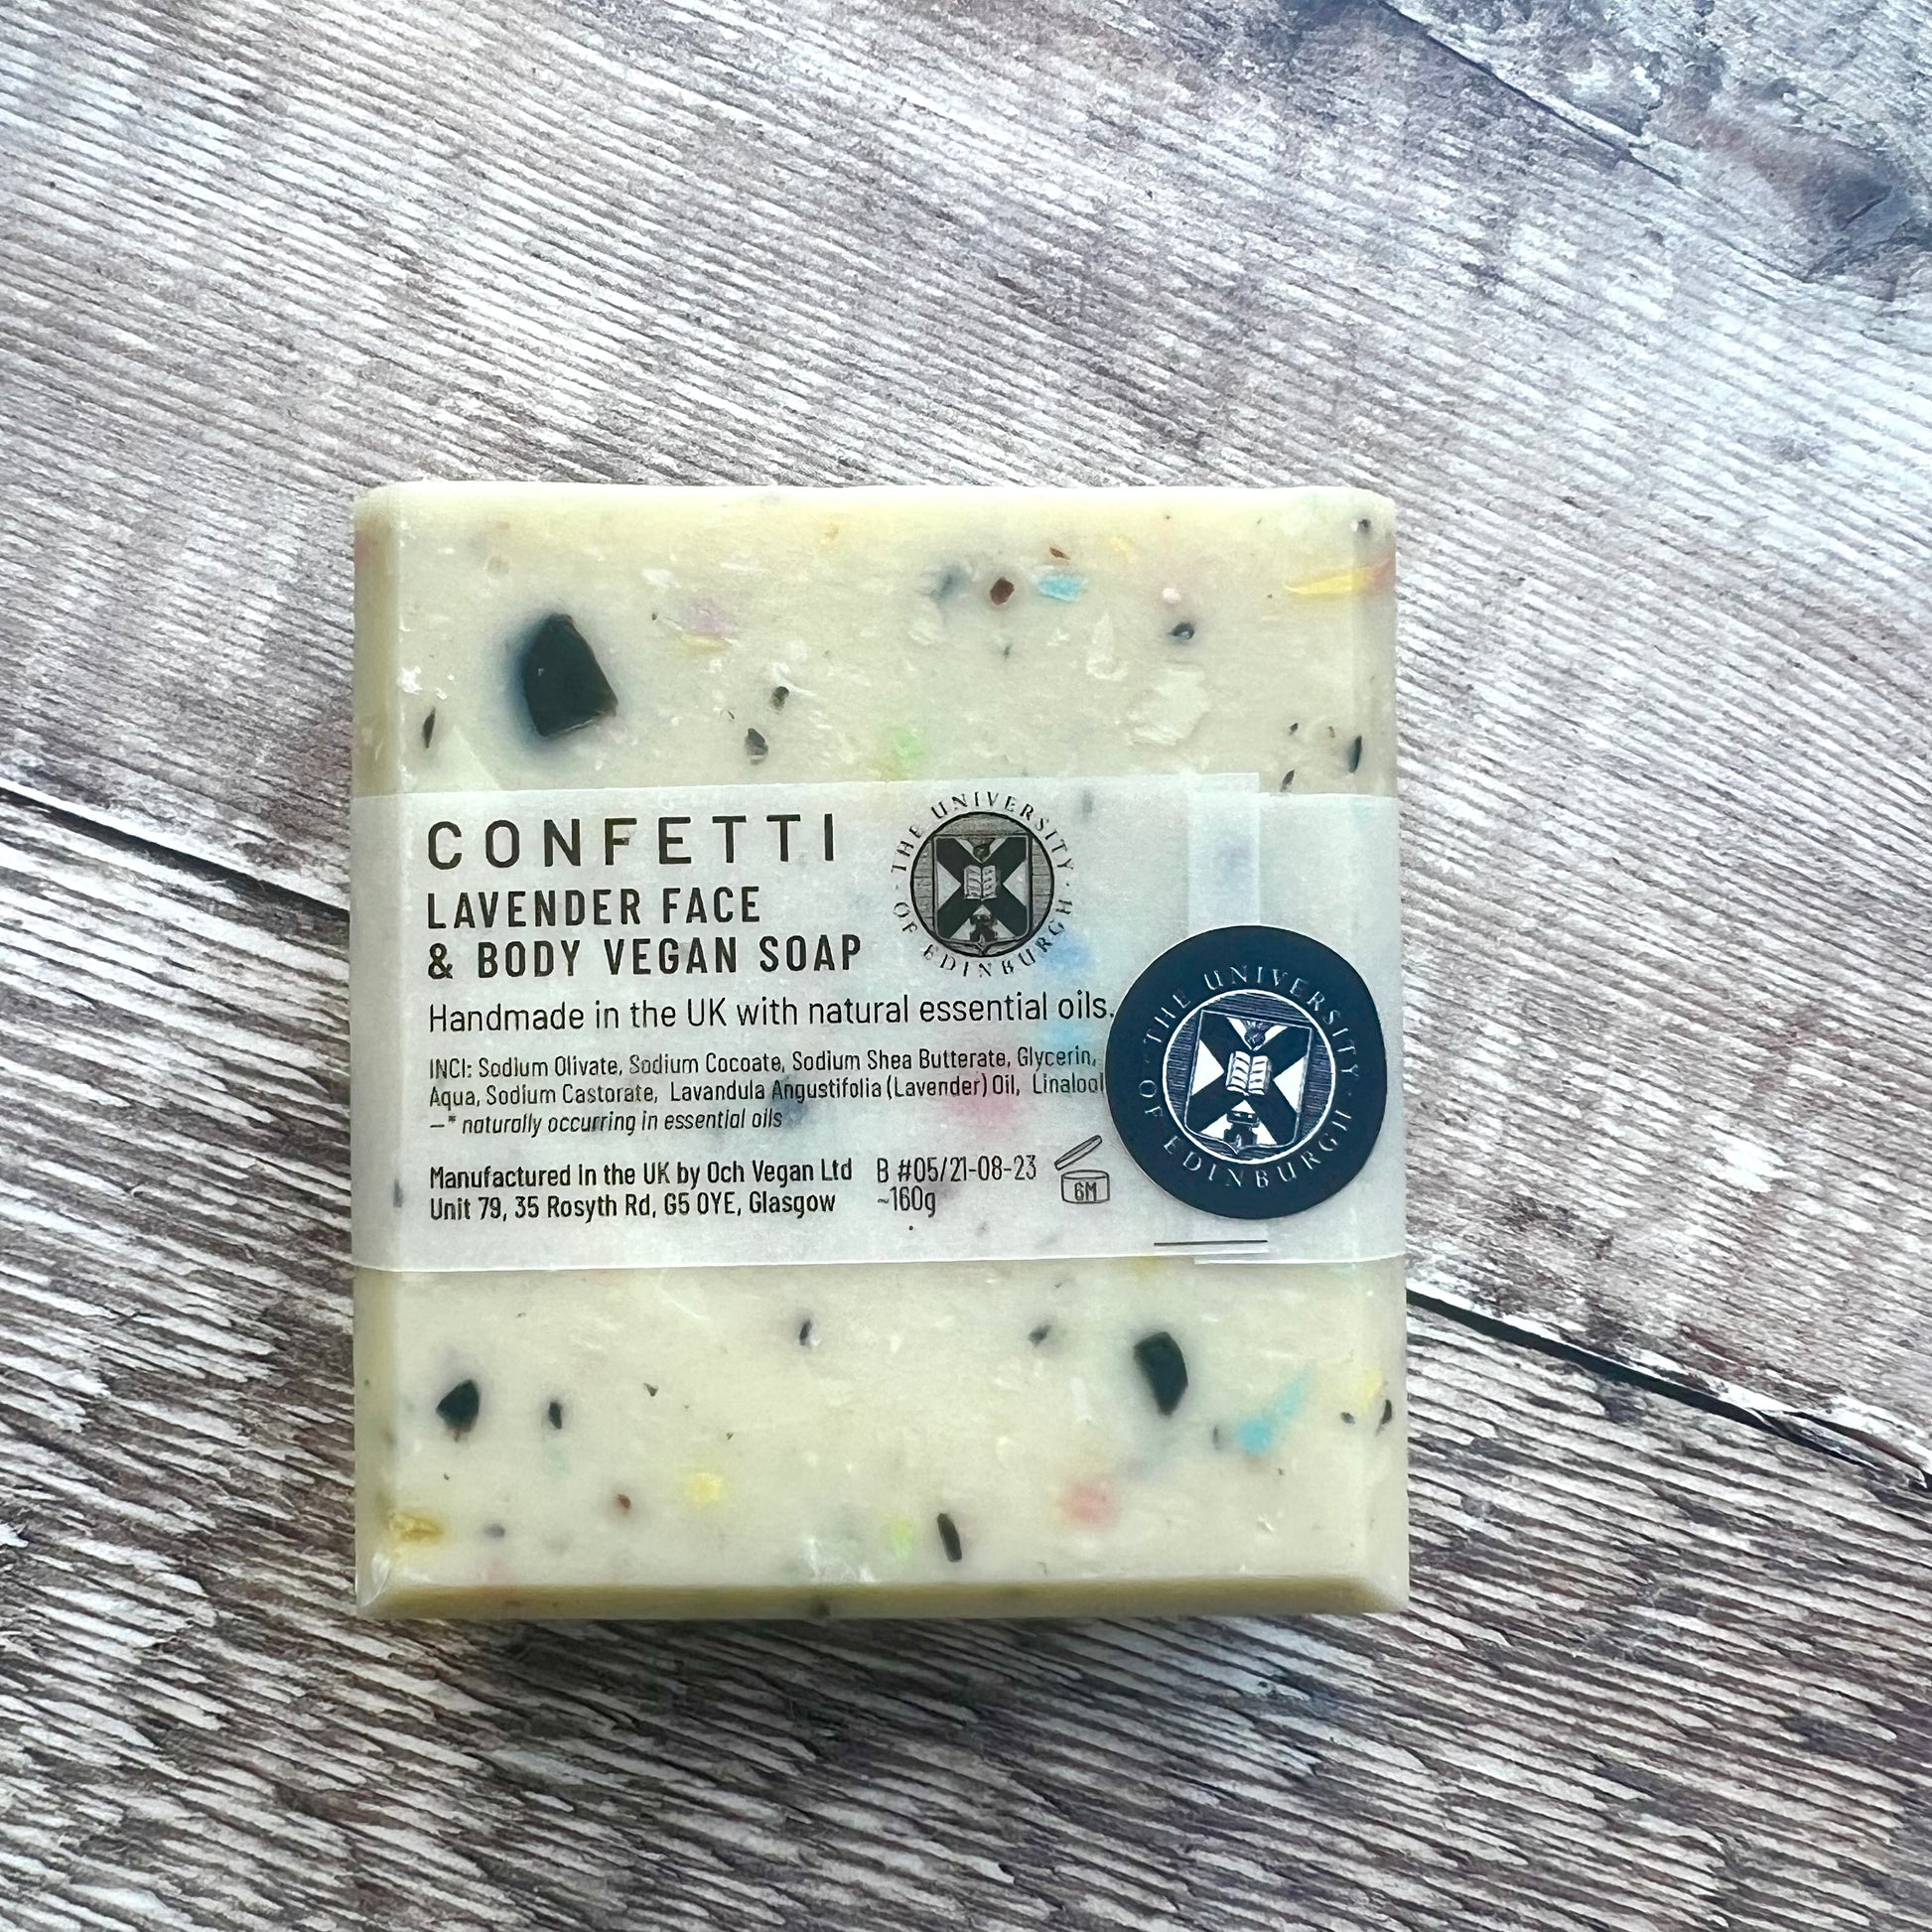 back on confetti soap with label featuring the university crest